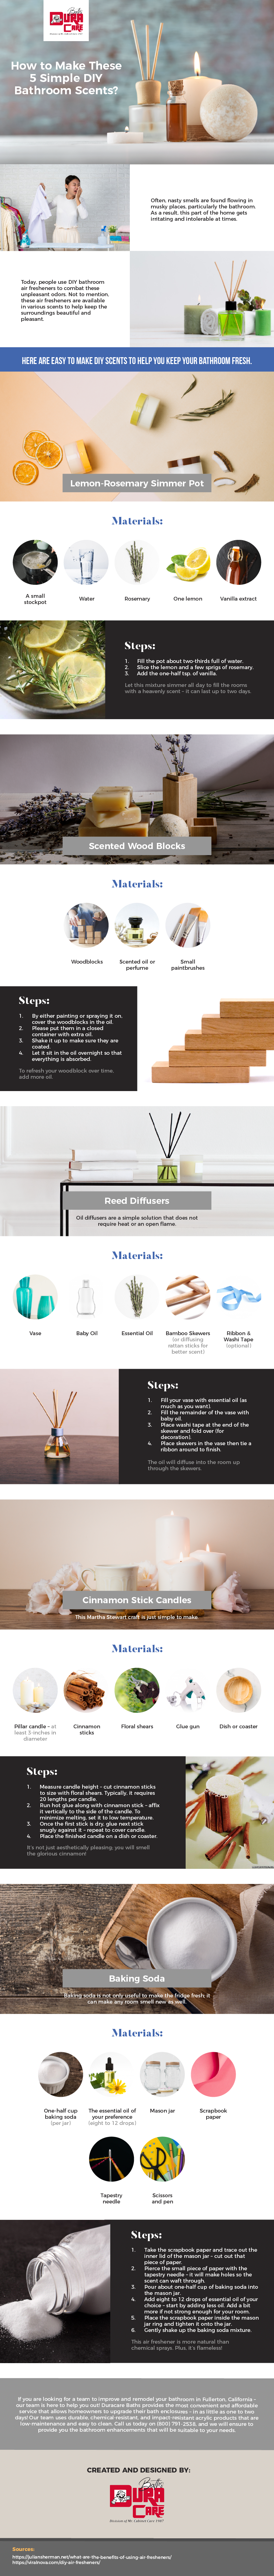 How to Make These 5 Simple DIY Bathroom Scents-01 infographic